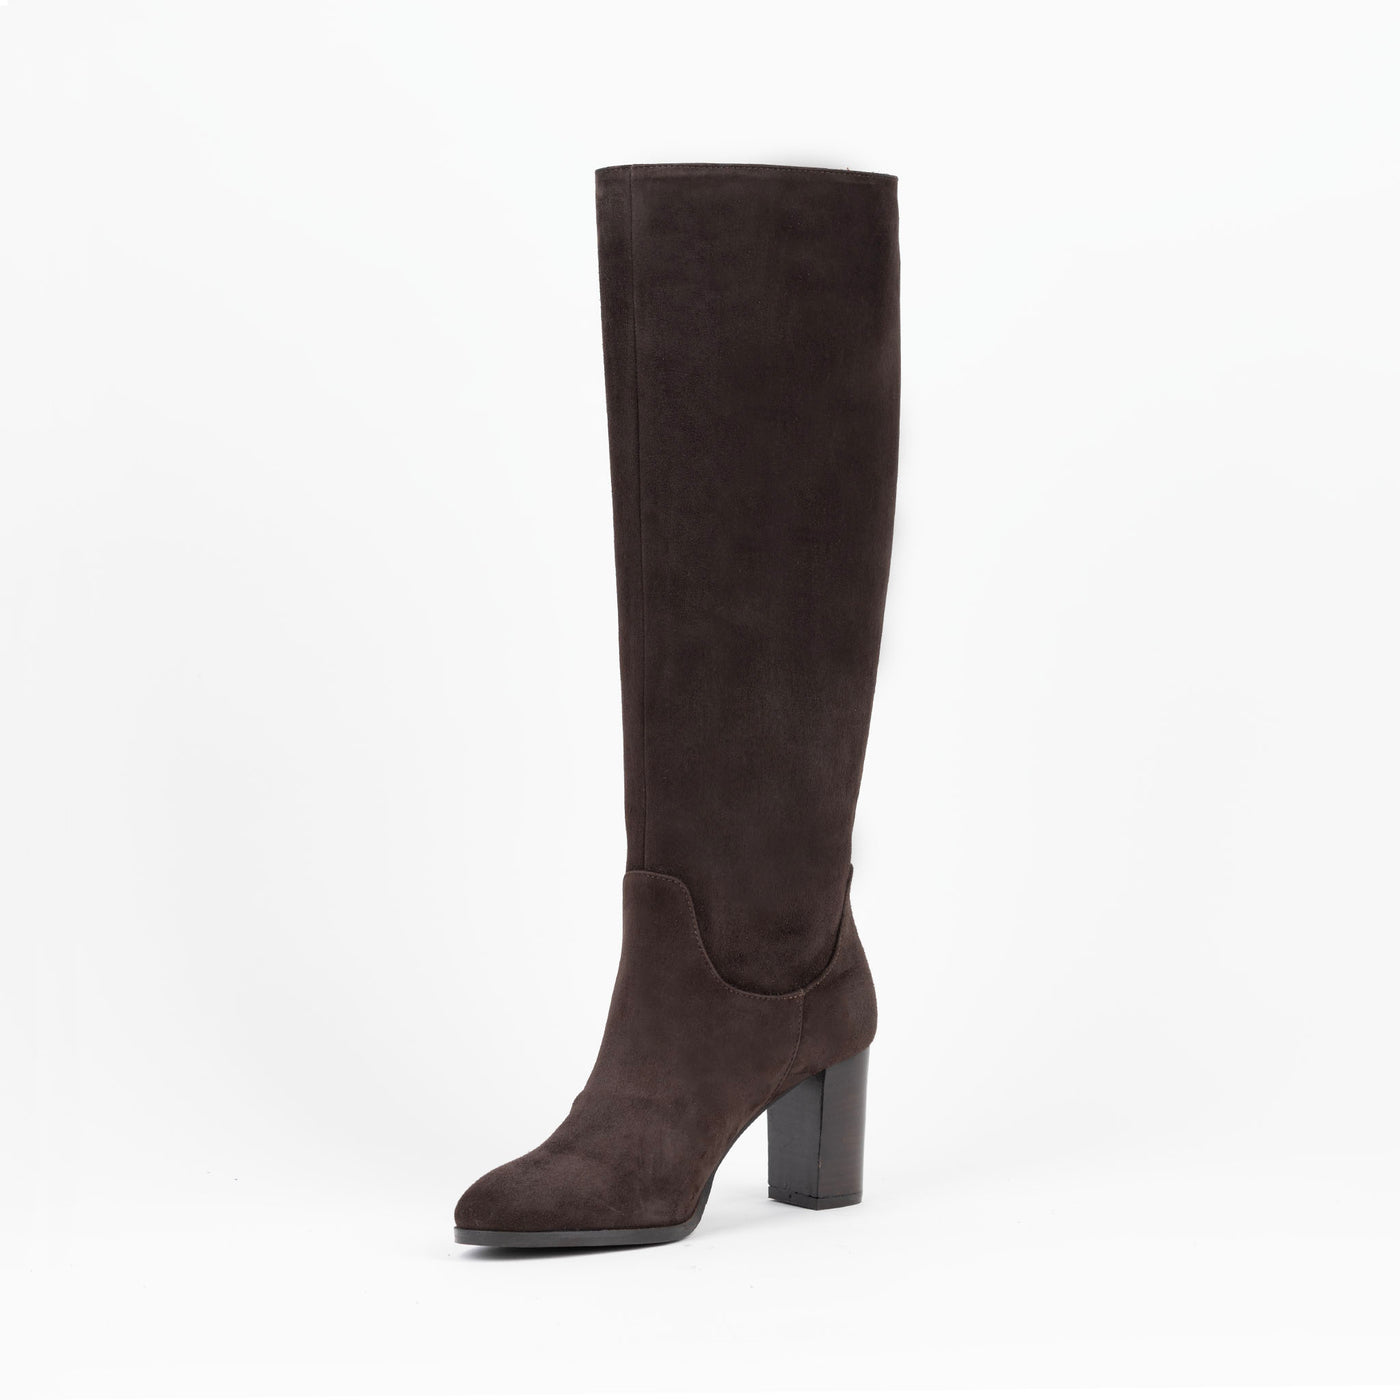 Brown suede pull-on style high heel boots